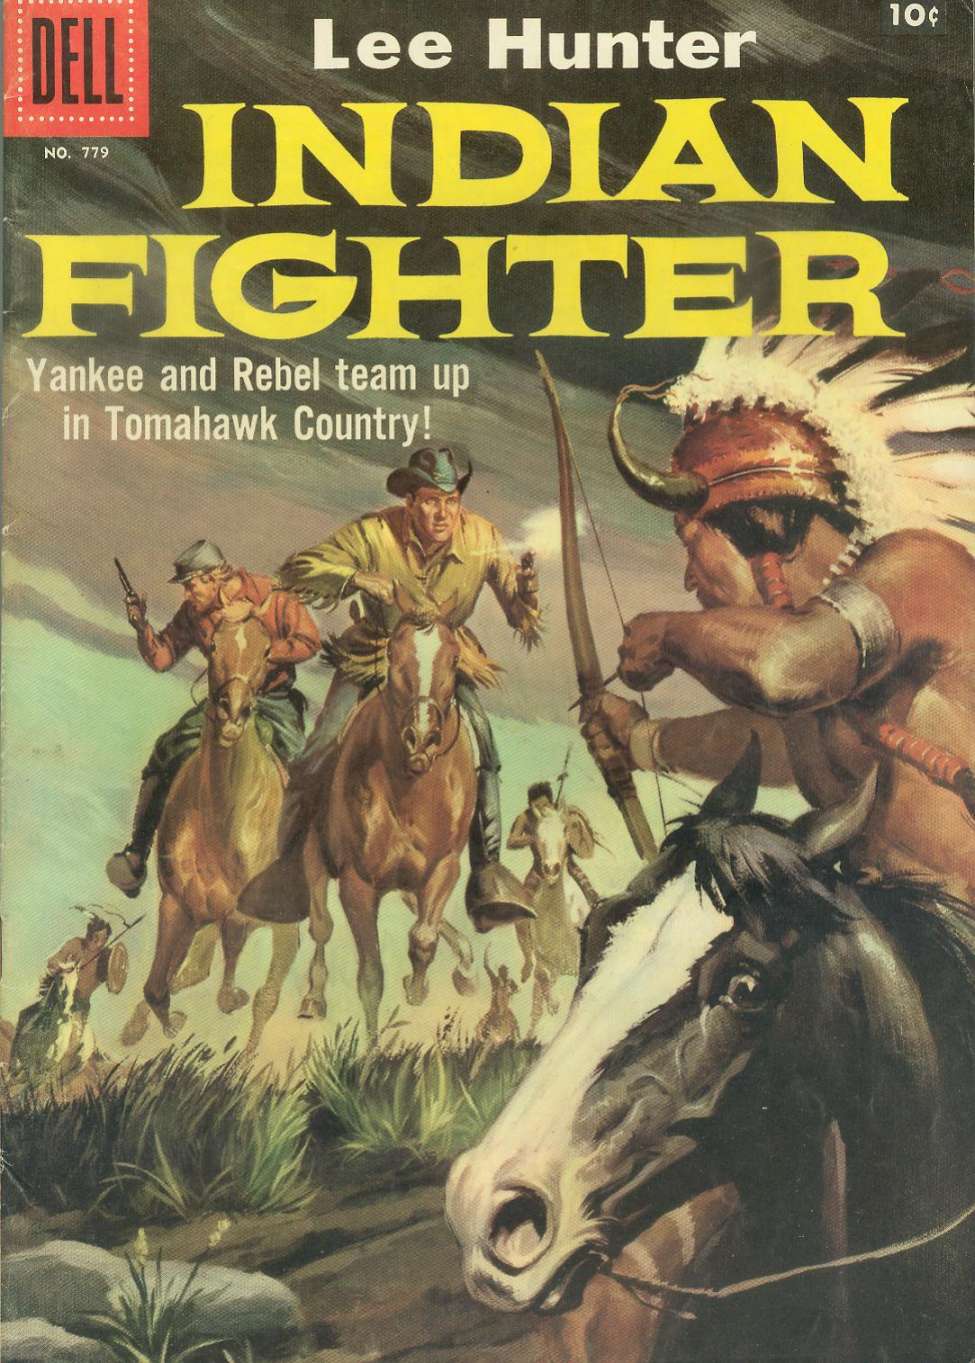 Book Cover For 0779 - Lee Hunter Indian Fighter